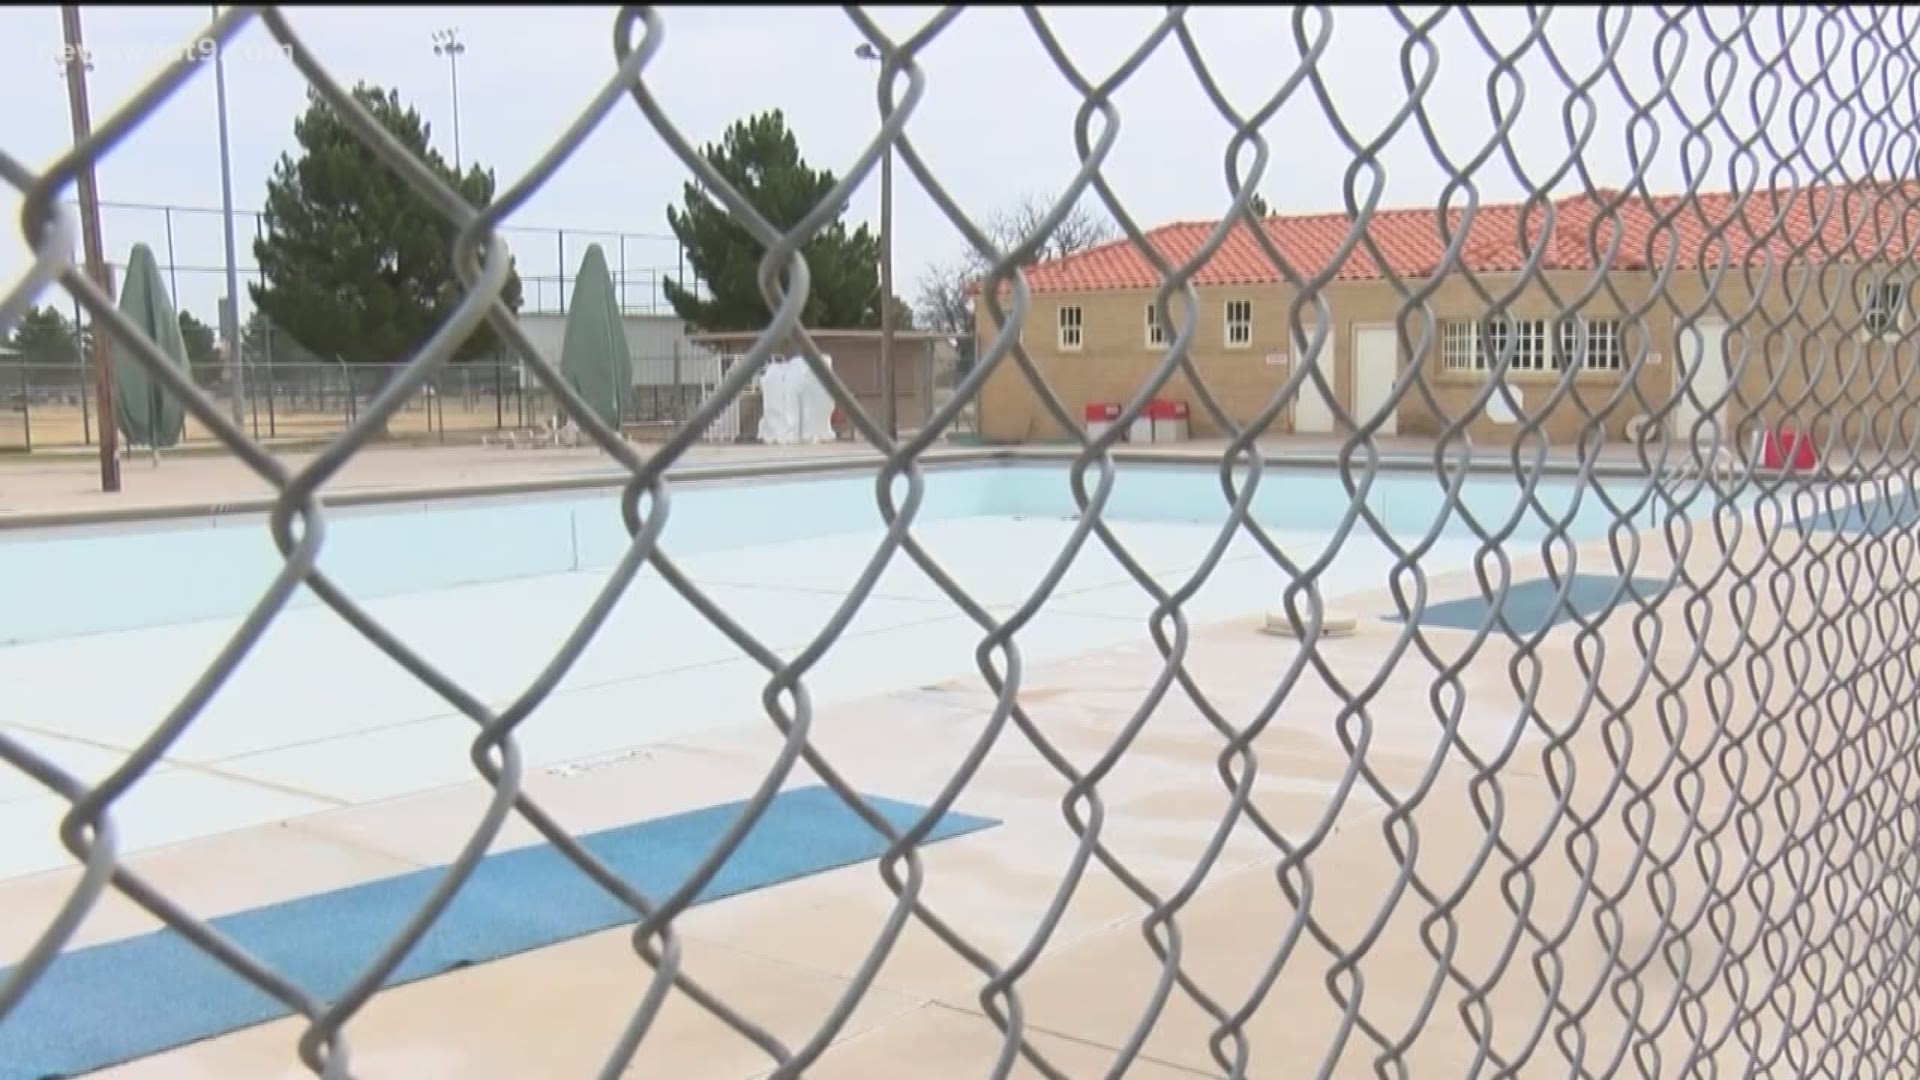 Payton suggested pools could be opened up as part of the second phase of city openings.